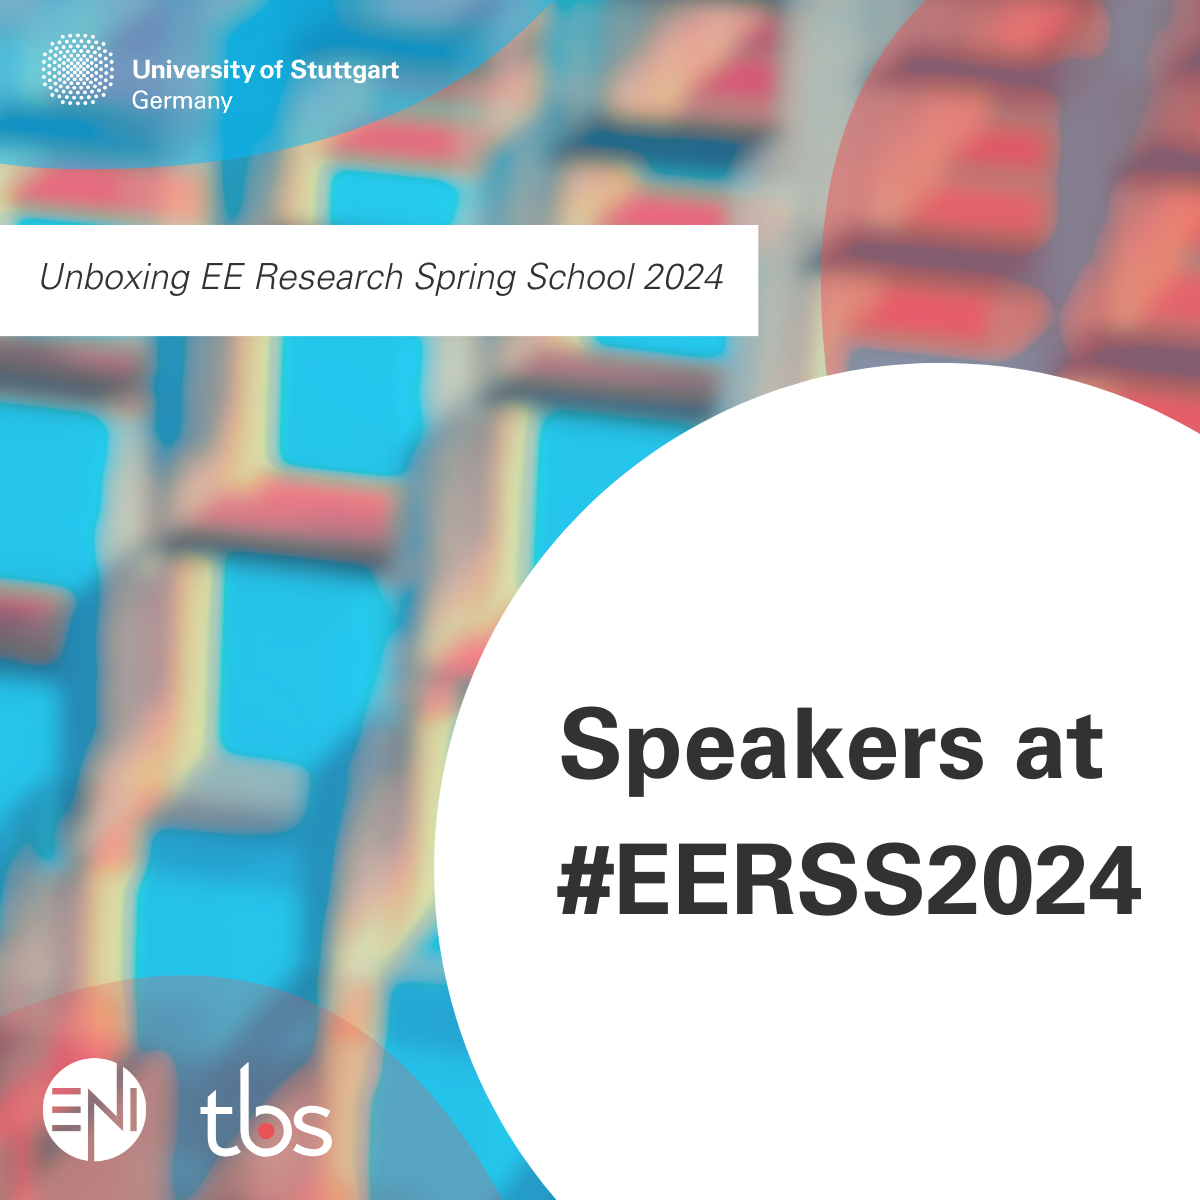 Unboxing #EERSS2024 Pt. 2: On the following slides you will find more information on our speakers.